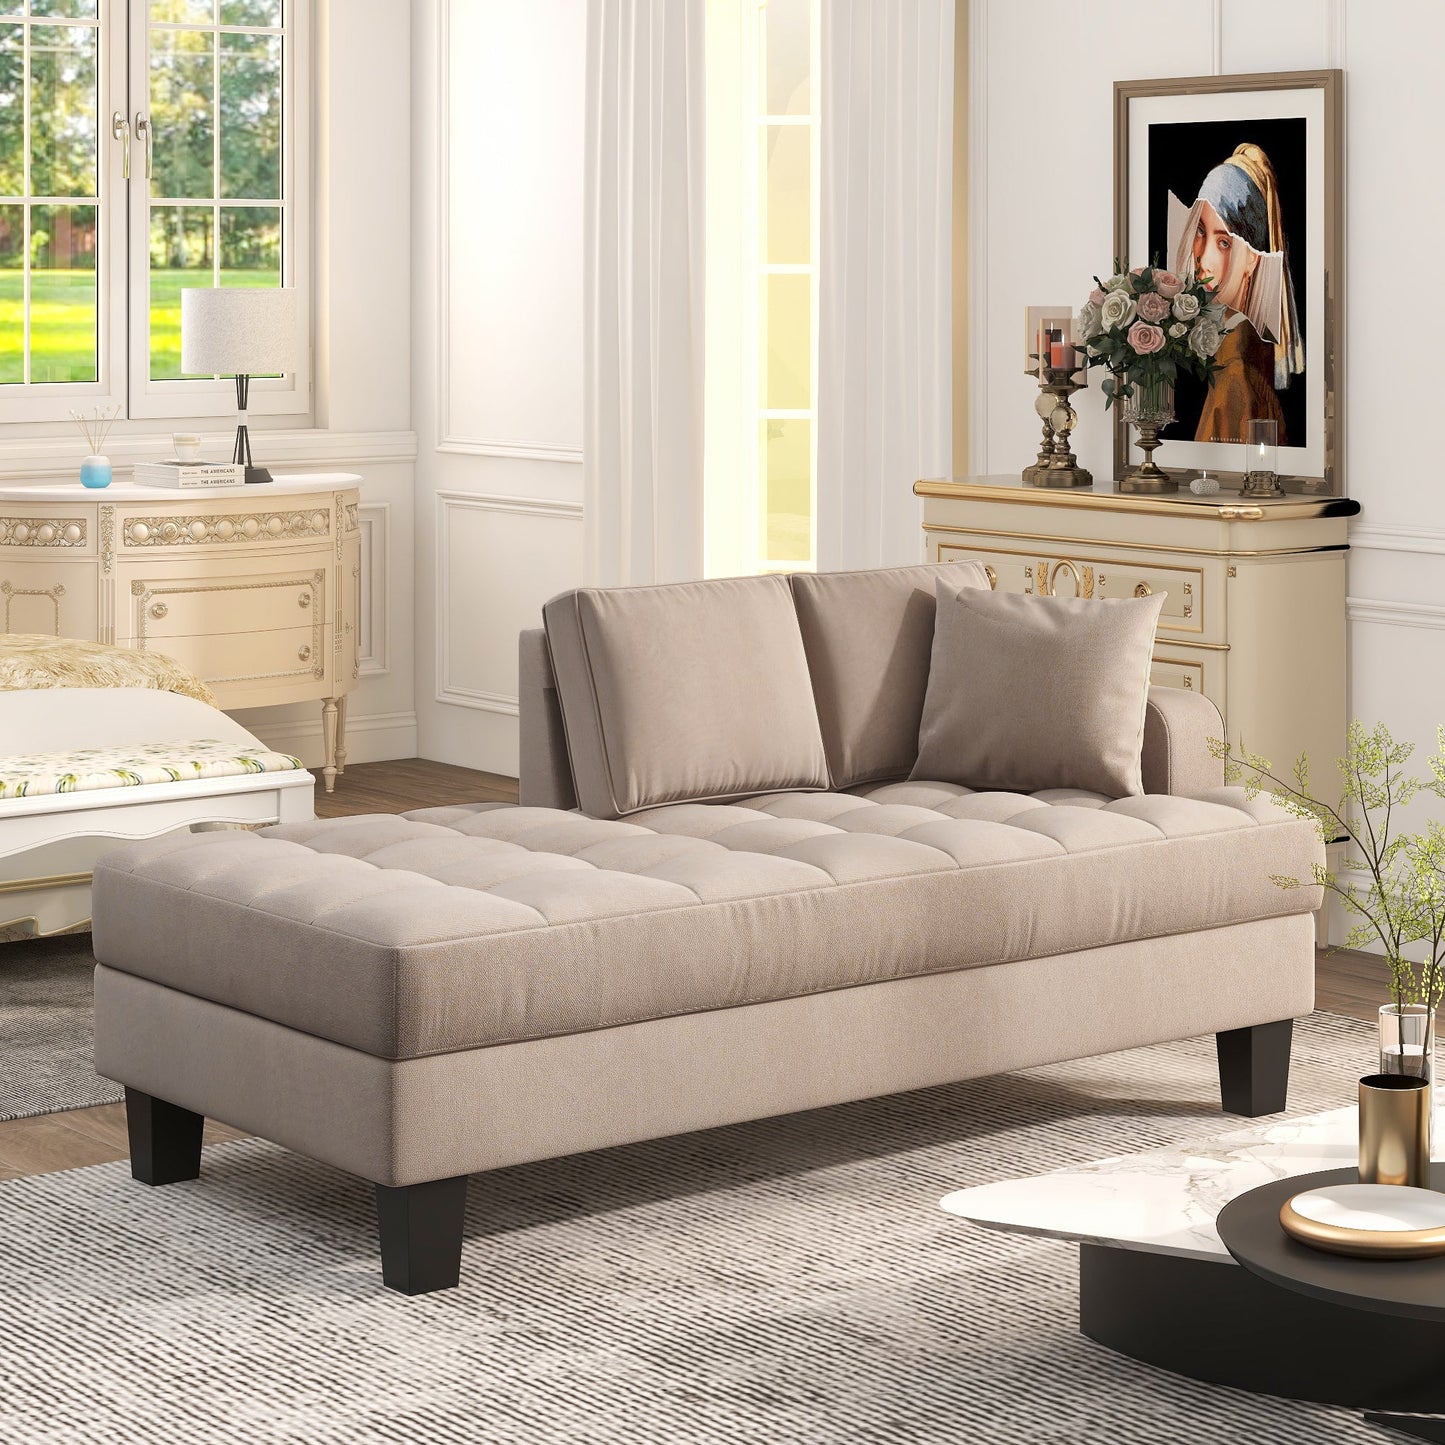 Galina Deep Tufted Upholstered Textured Fabric Chaise Lounge with Toss Pillow, Warm Grey